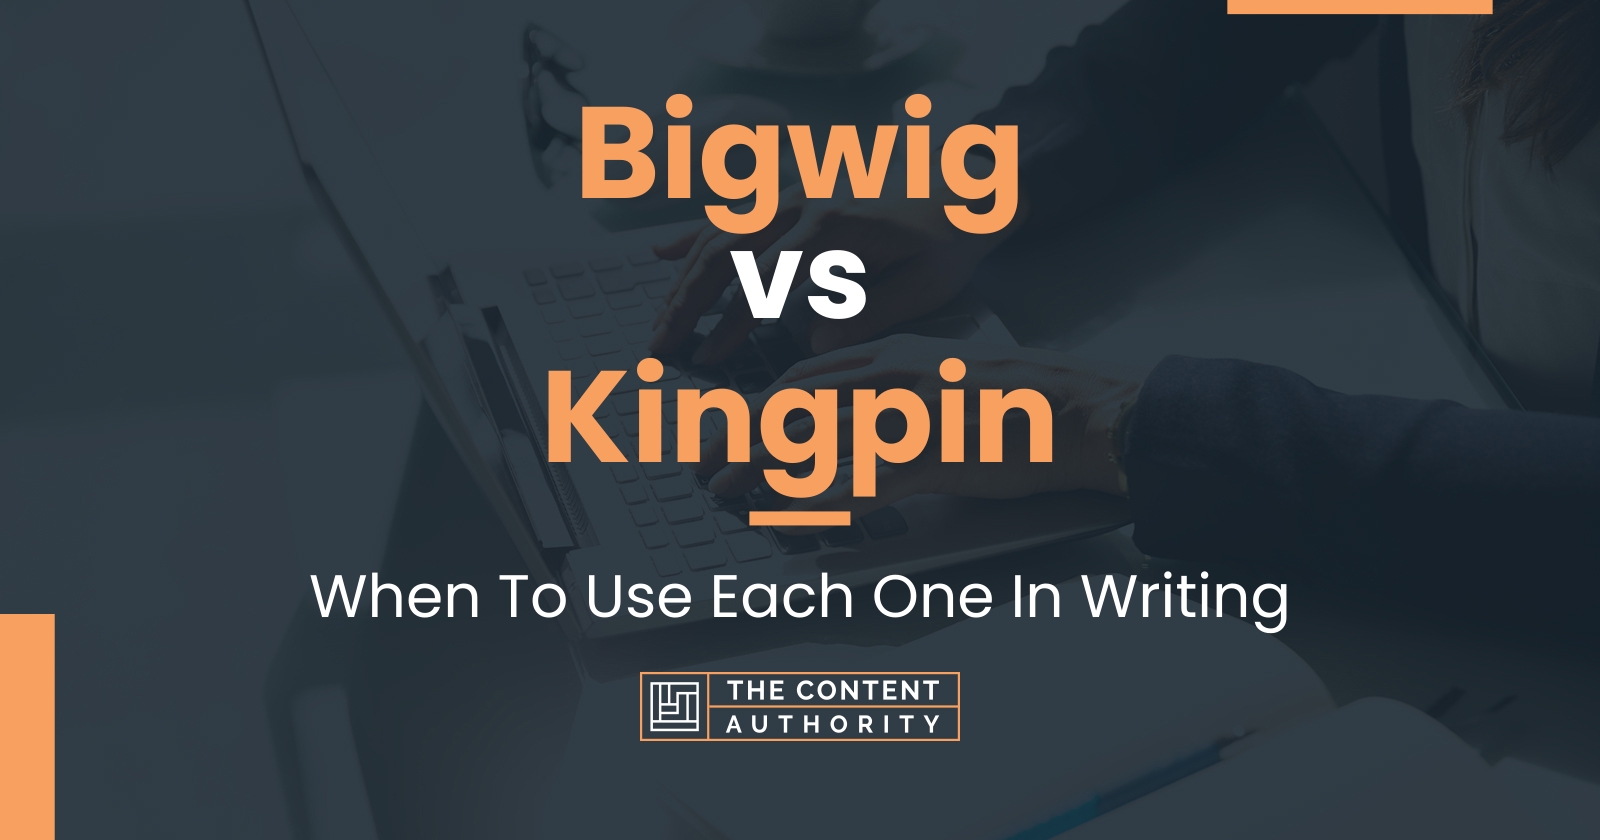 Bigwig vs Kingpin: When To Use Each One In Writing